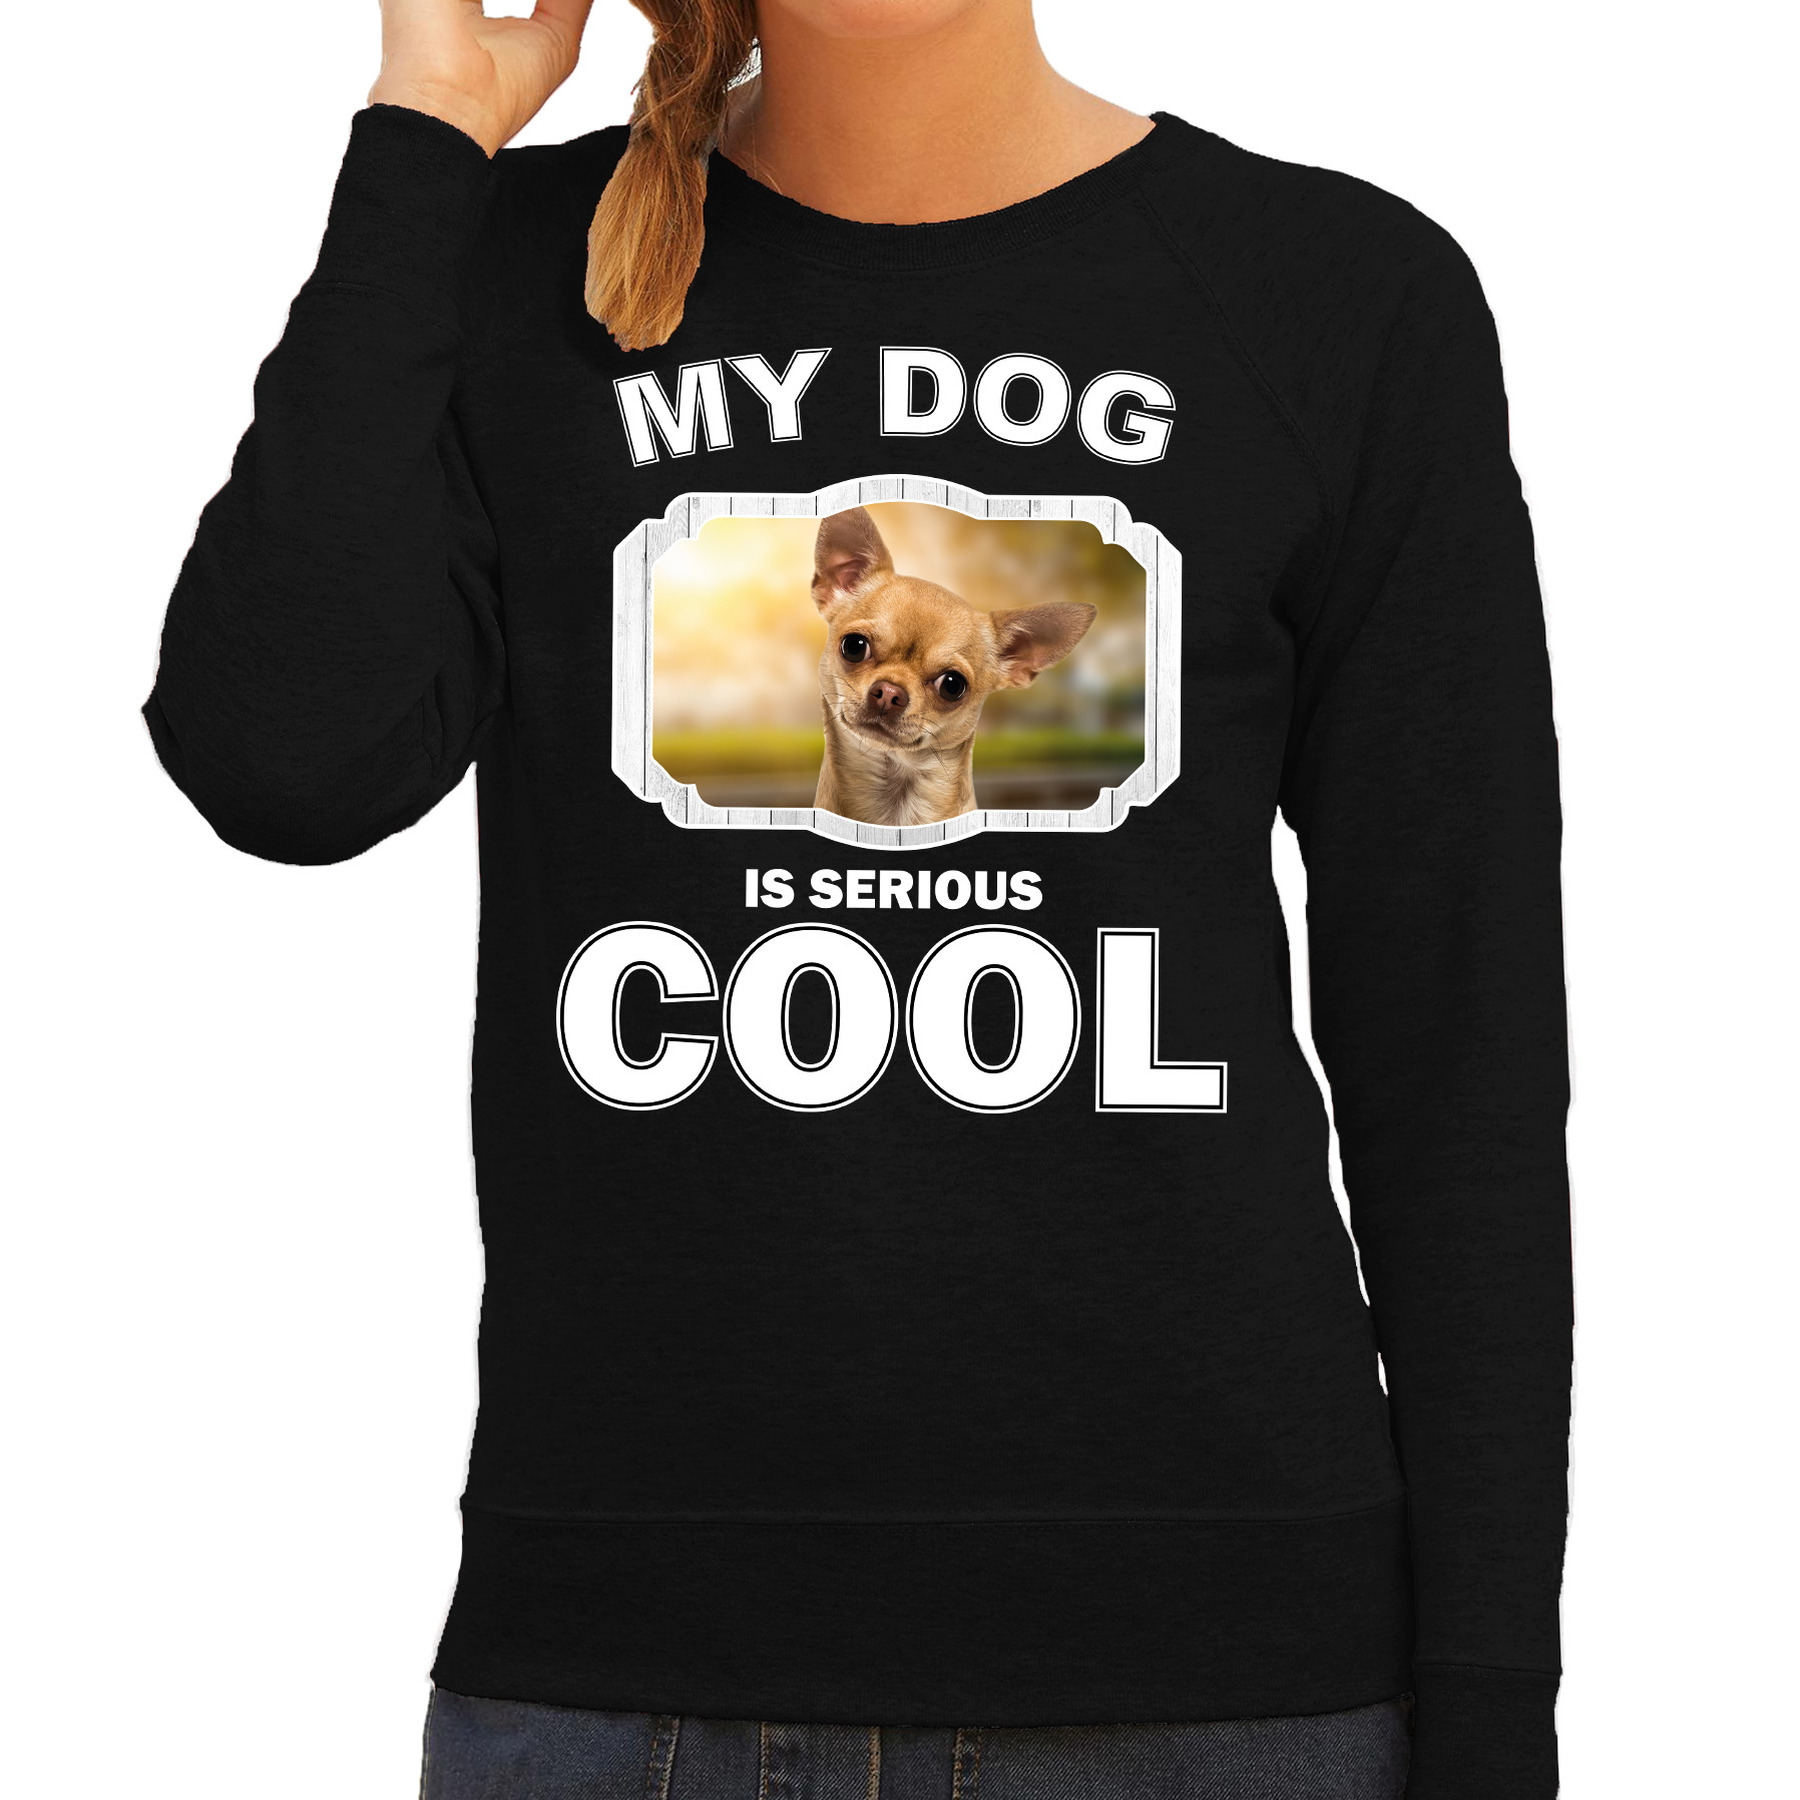 Chihuahua honden sweater-trui my dog is serious cool zwart voor dames